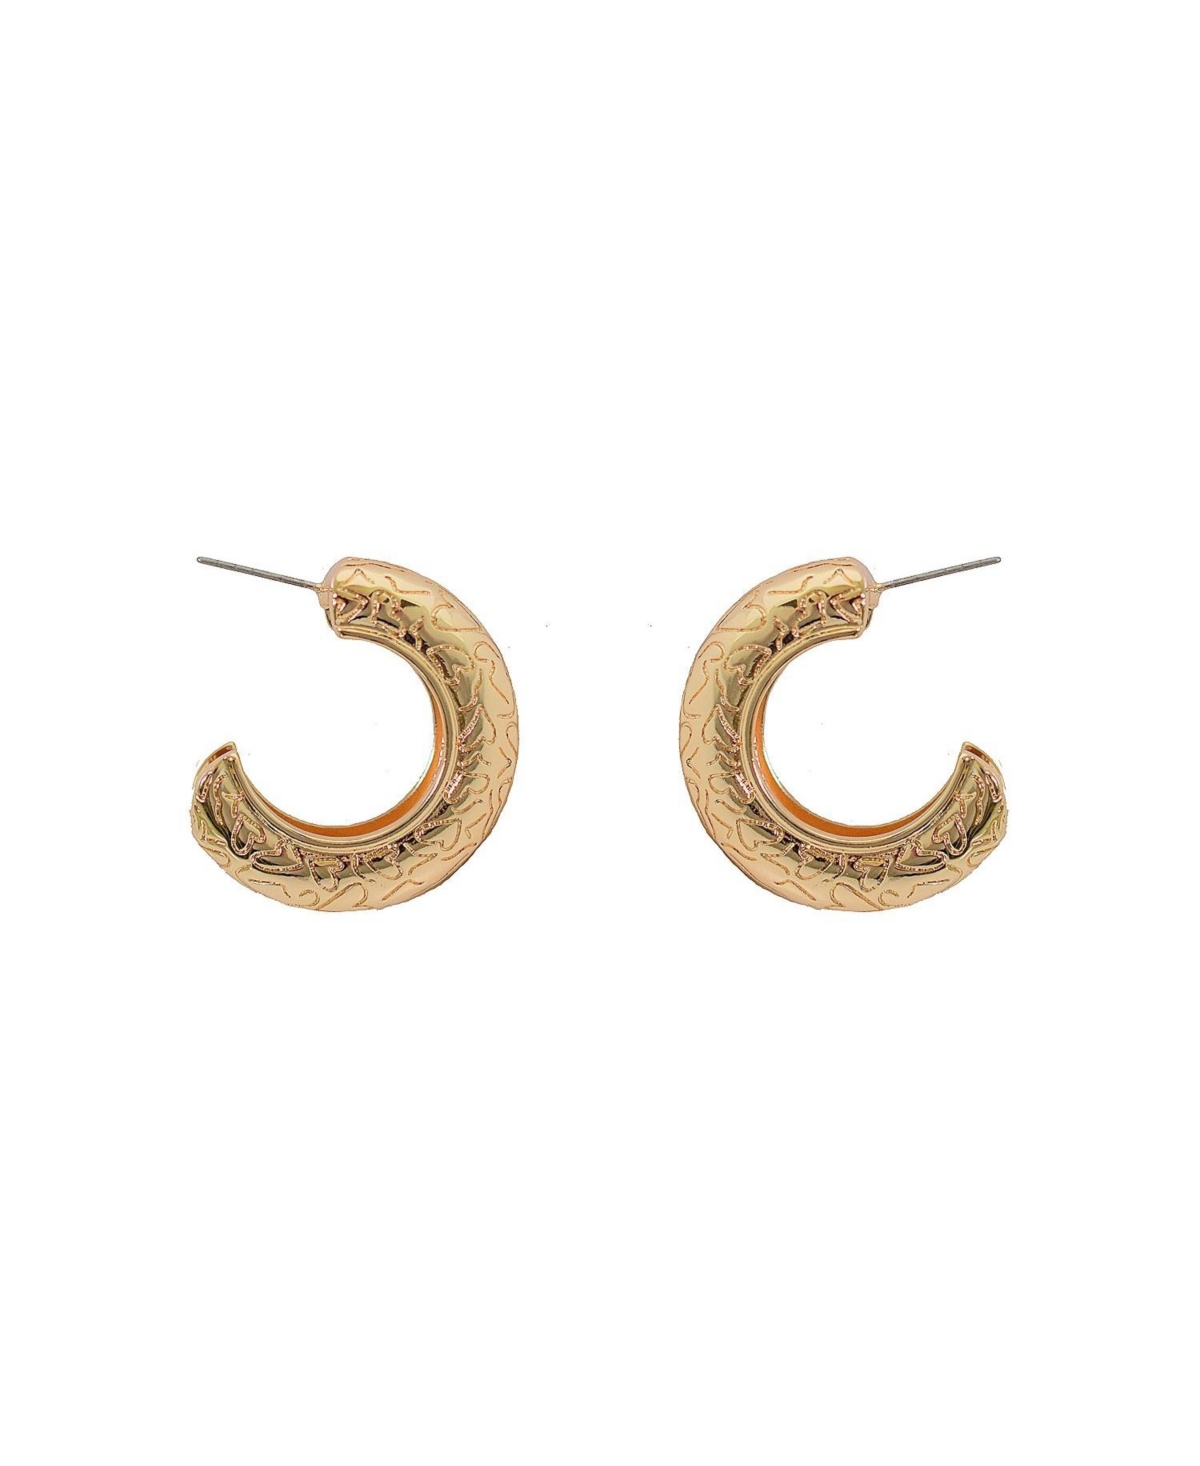 Gold Tone Etched Hoop Earrings - Gold